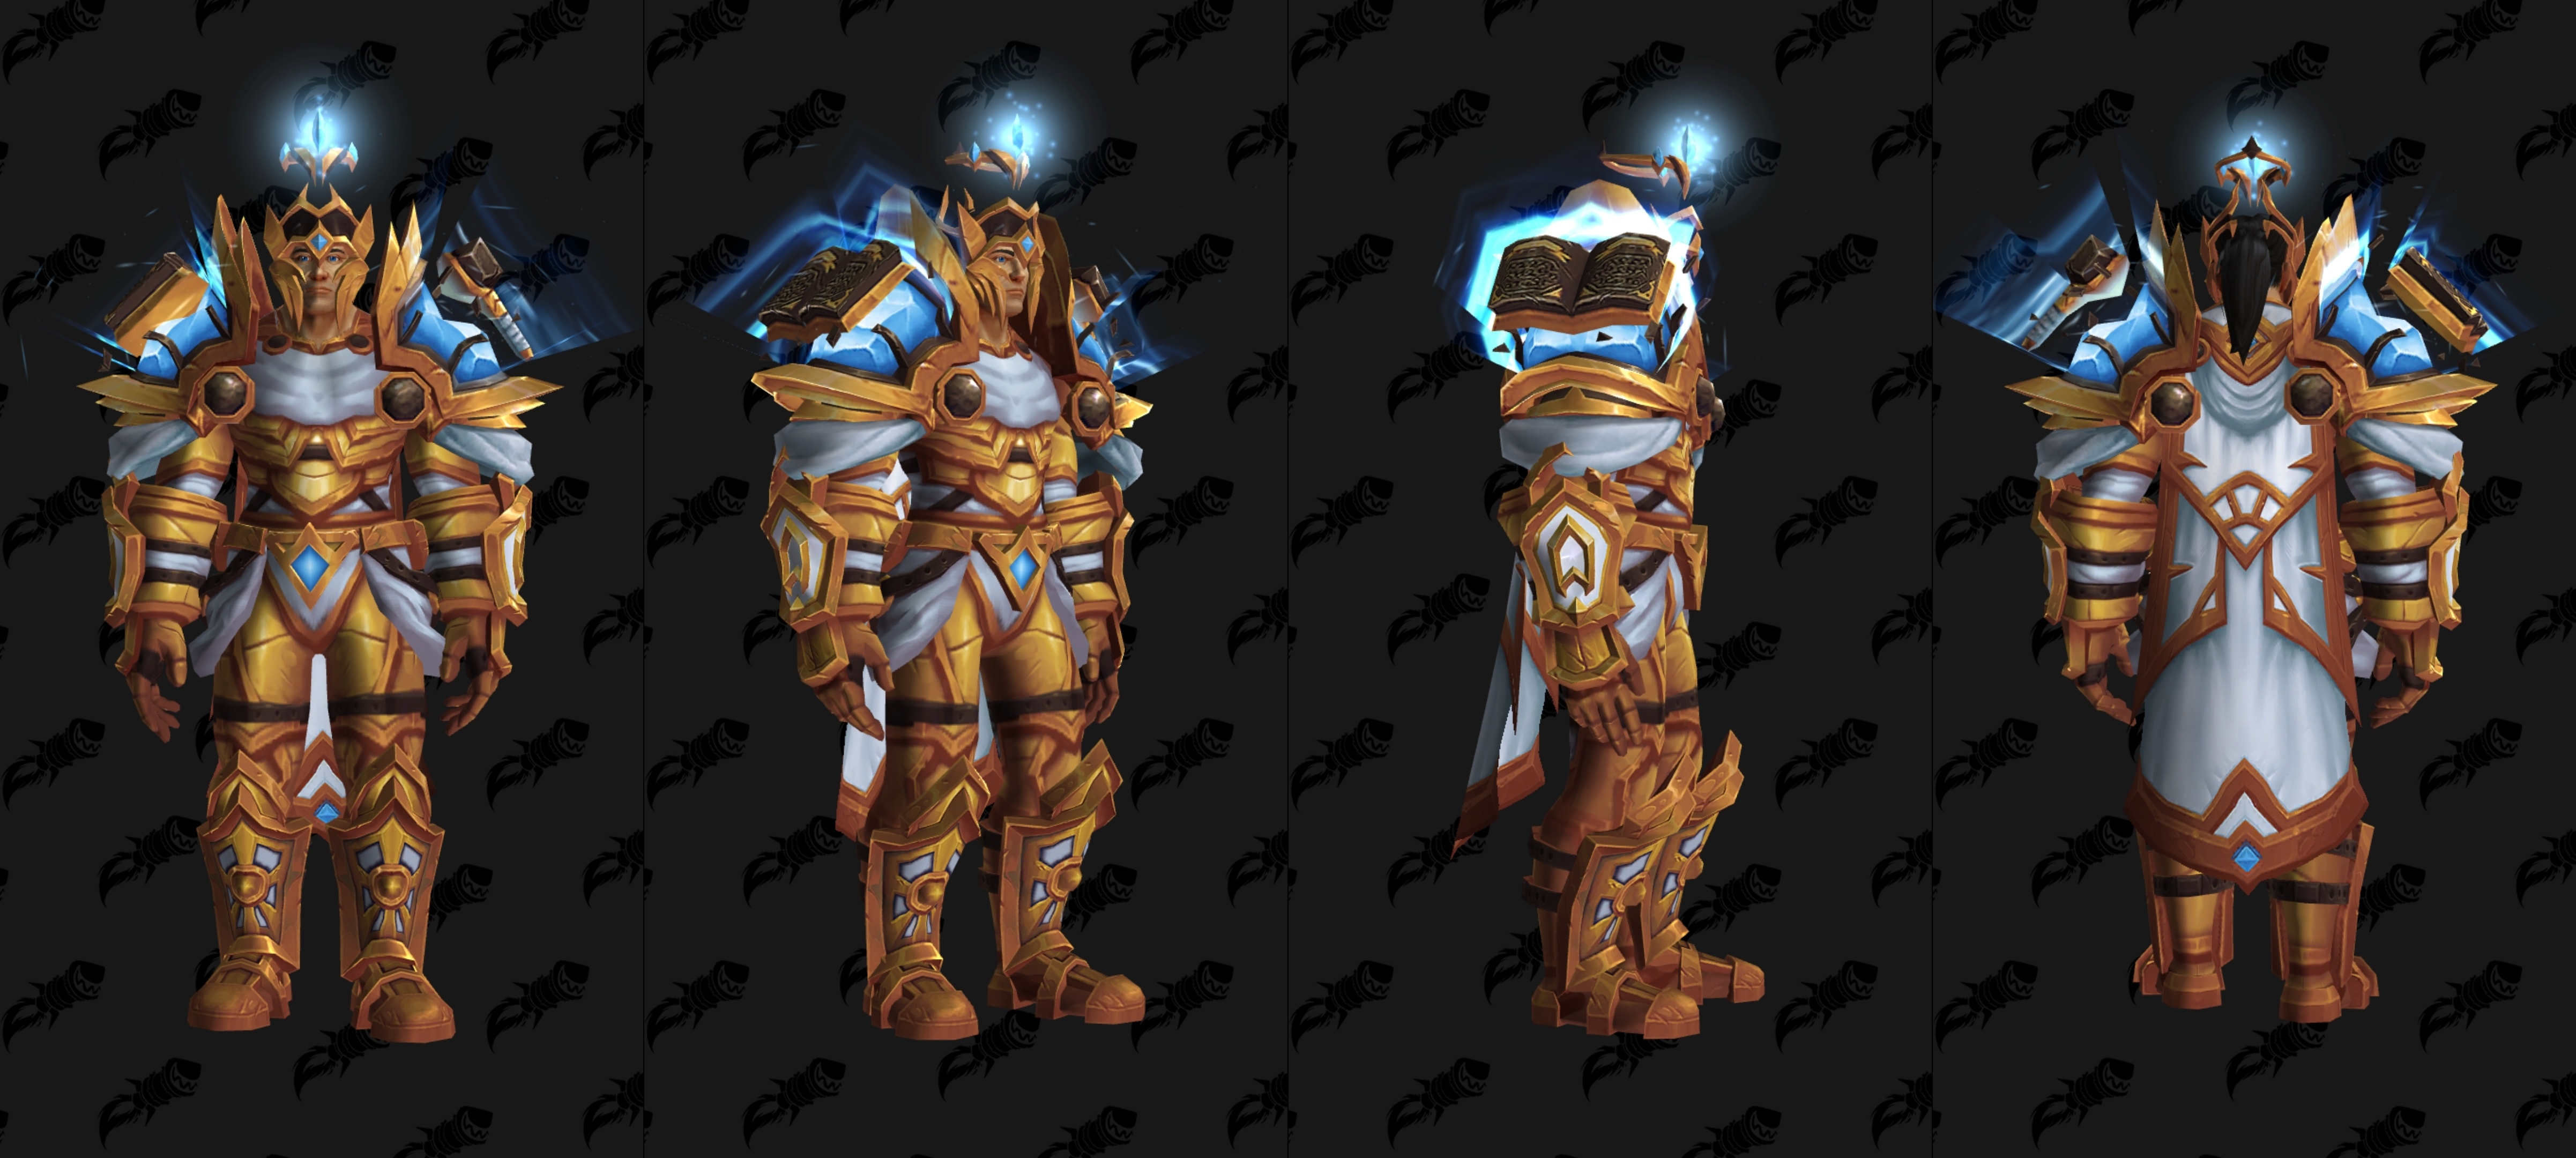 Paladin Mage Tower DPS Challenge Guide - Sigryn - Dragonflight 10.1 -